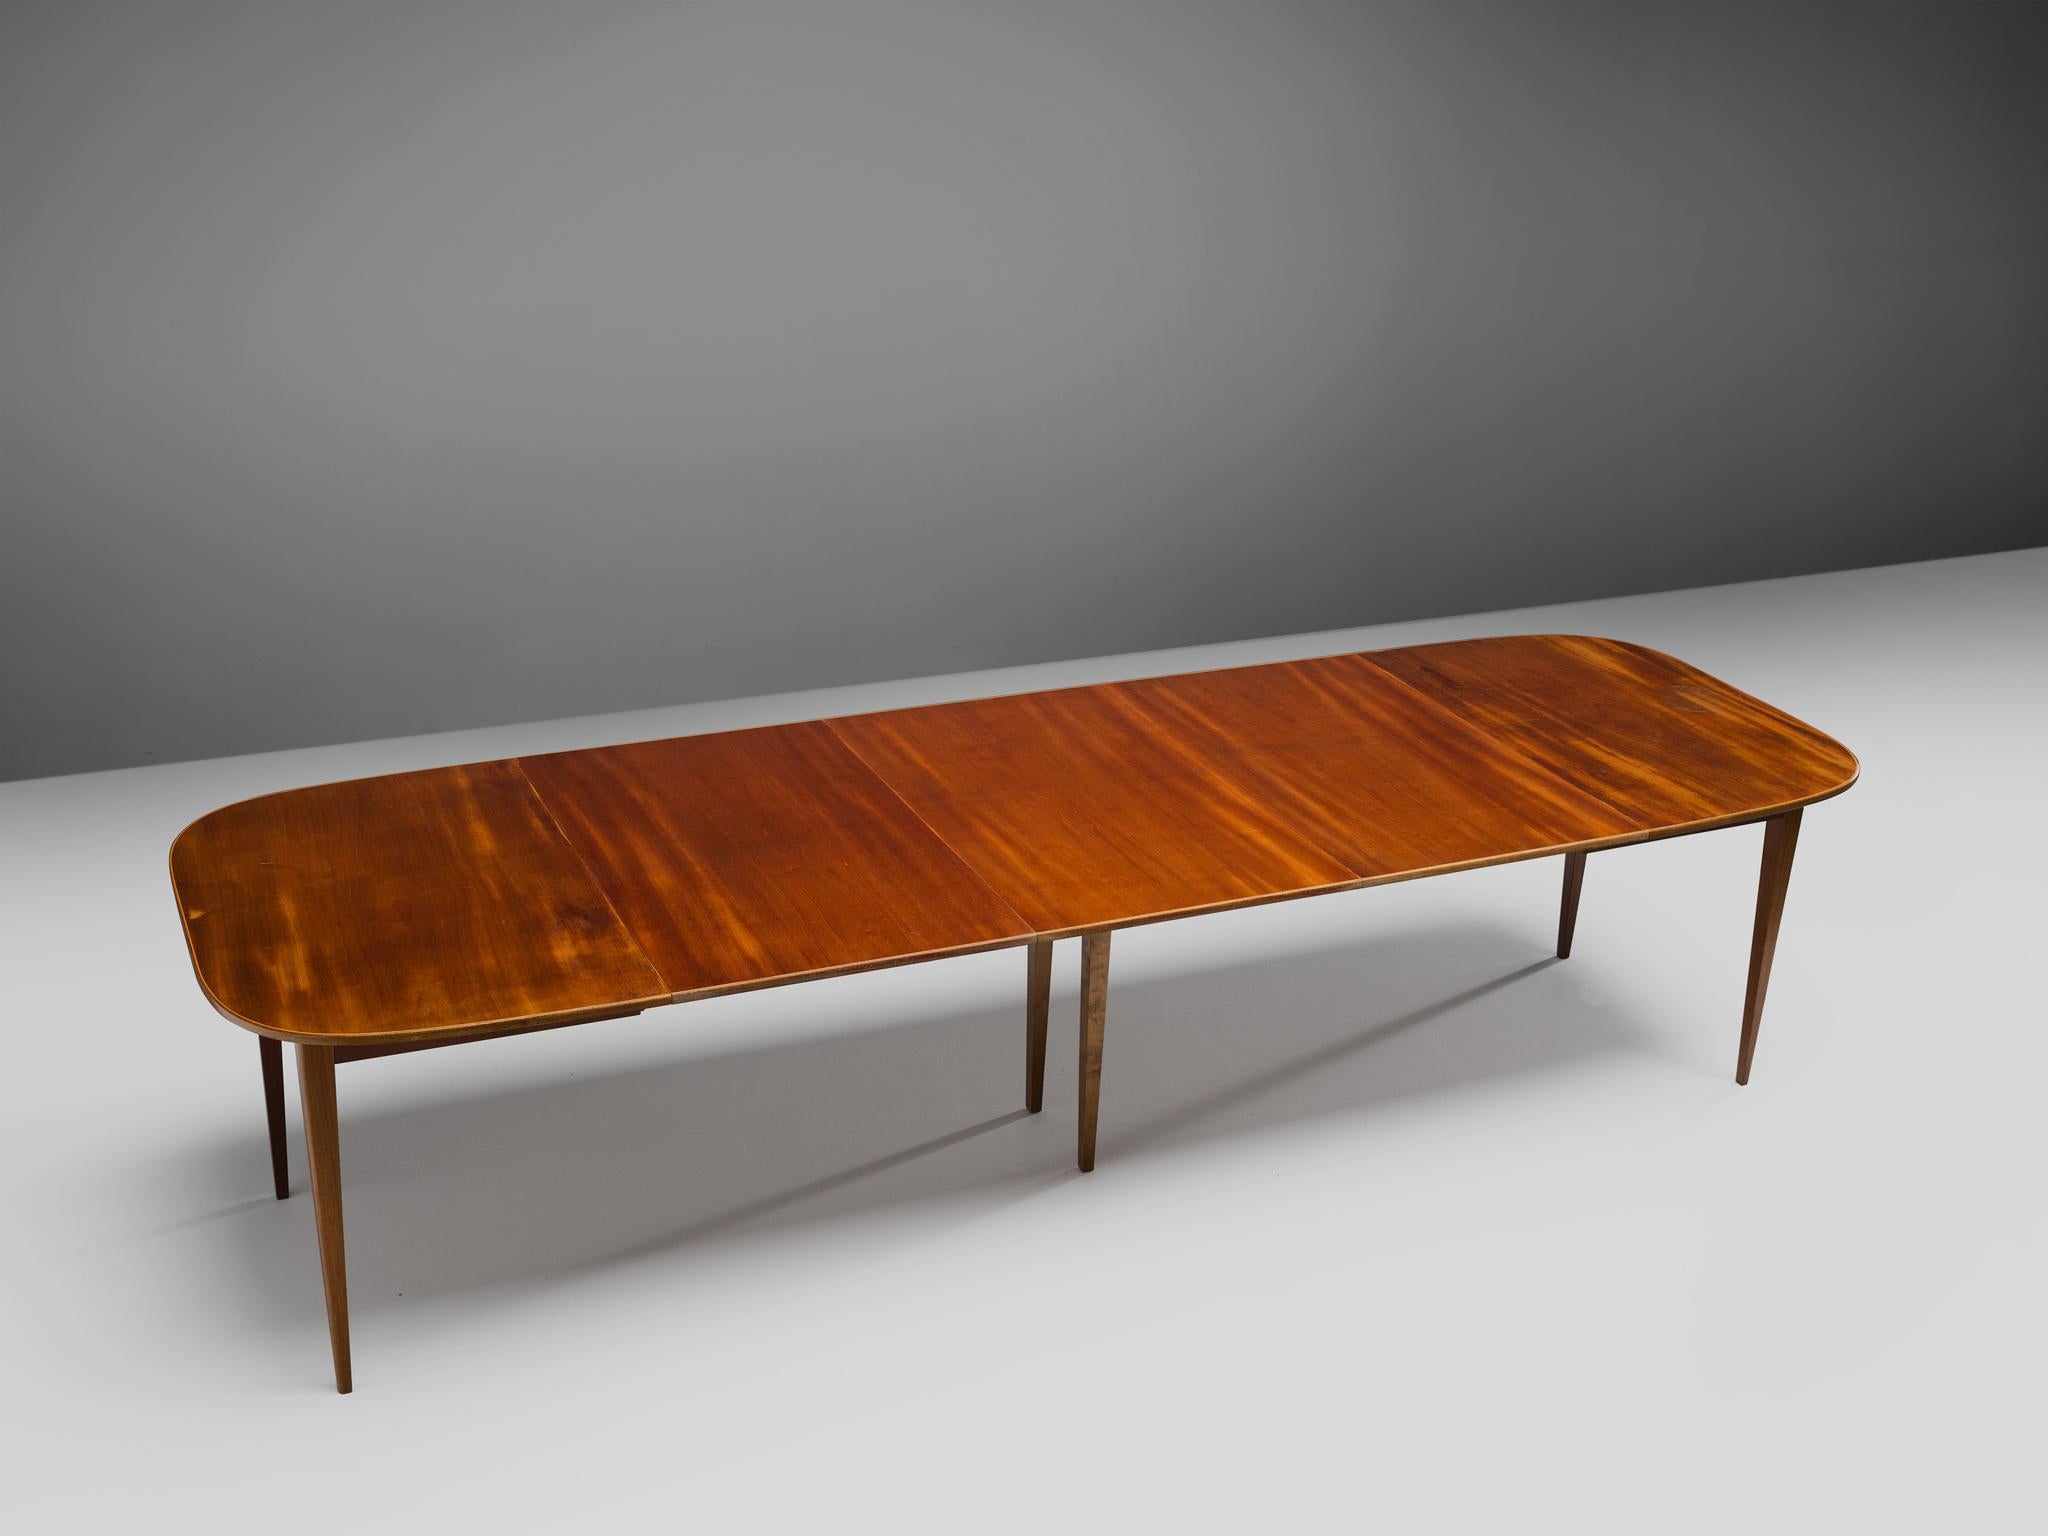 David Rosén for Nordiska Kompaniet, extremely wide extendable dining table, mahogany, Sweden, 1950s

This extendable dining table is highly elegant, due to the thin top and smoothly tapered legs. The rectangular shape has rounded corners and a